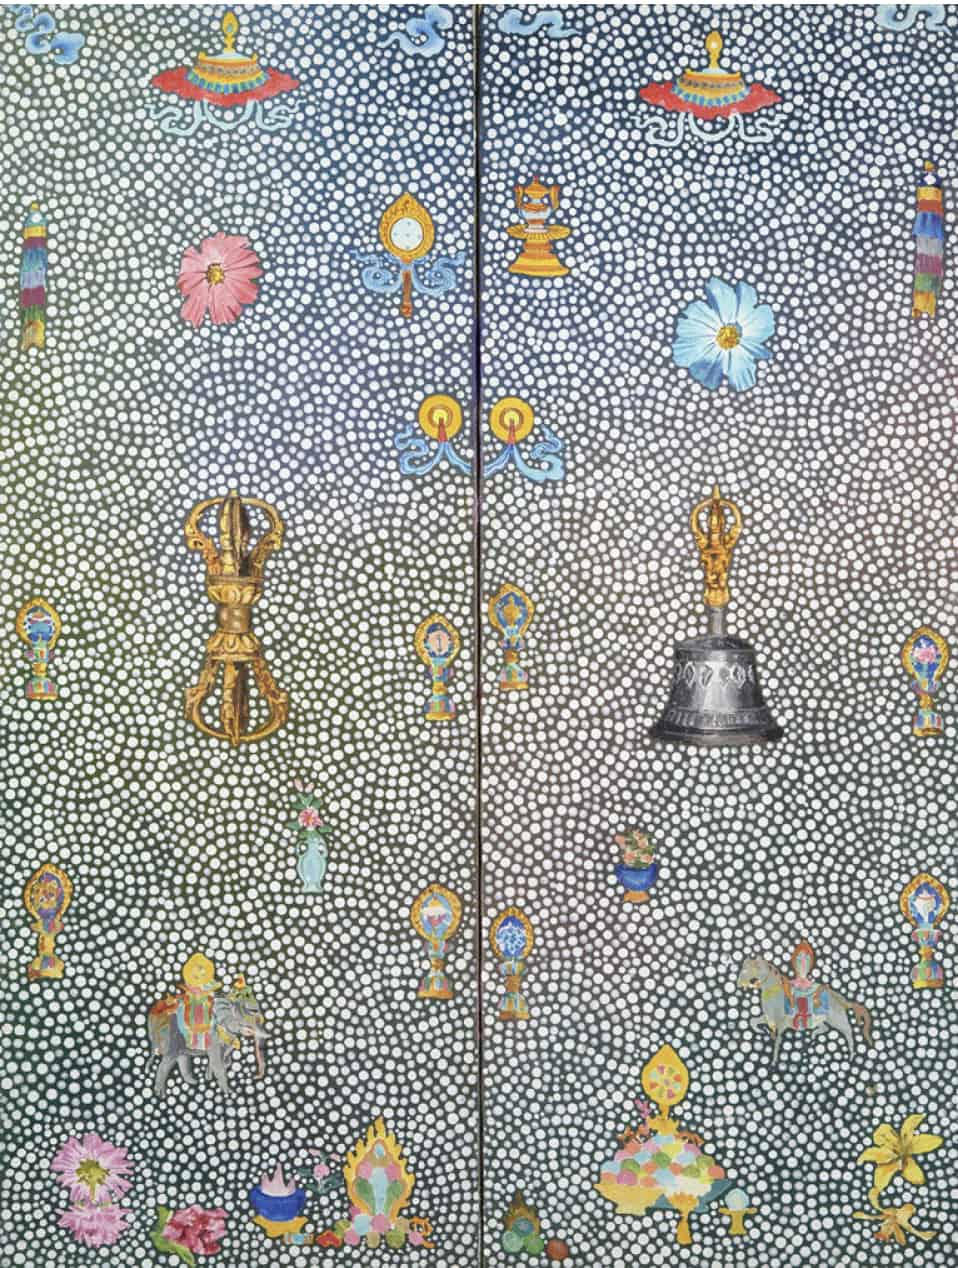 Australian patterns and Tibetan ritual elements combine in Dorje and Dilbu, by Karma Phuntsok. Press image courtesy of WCMA and Shelley and Donald Rubin Private Collection.